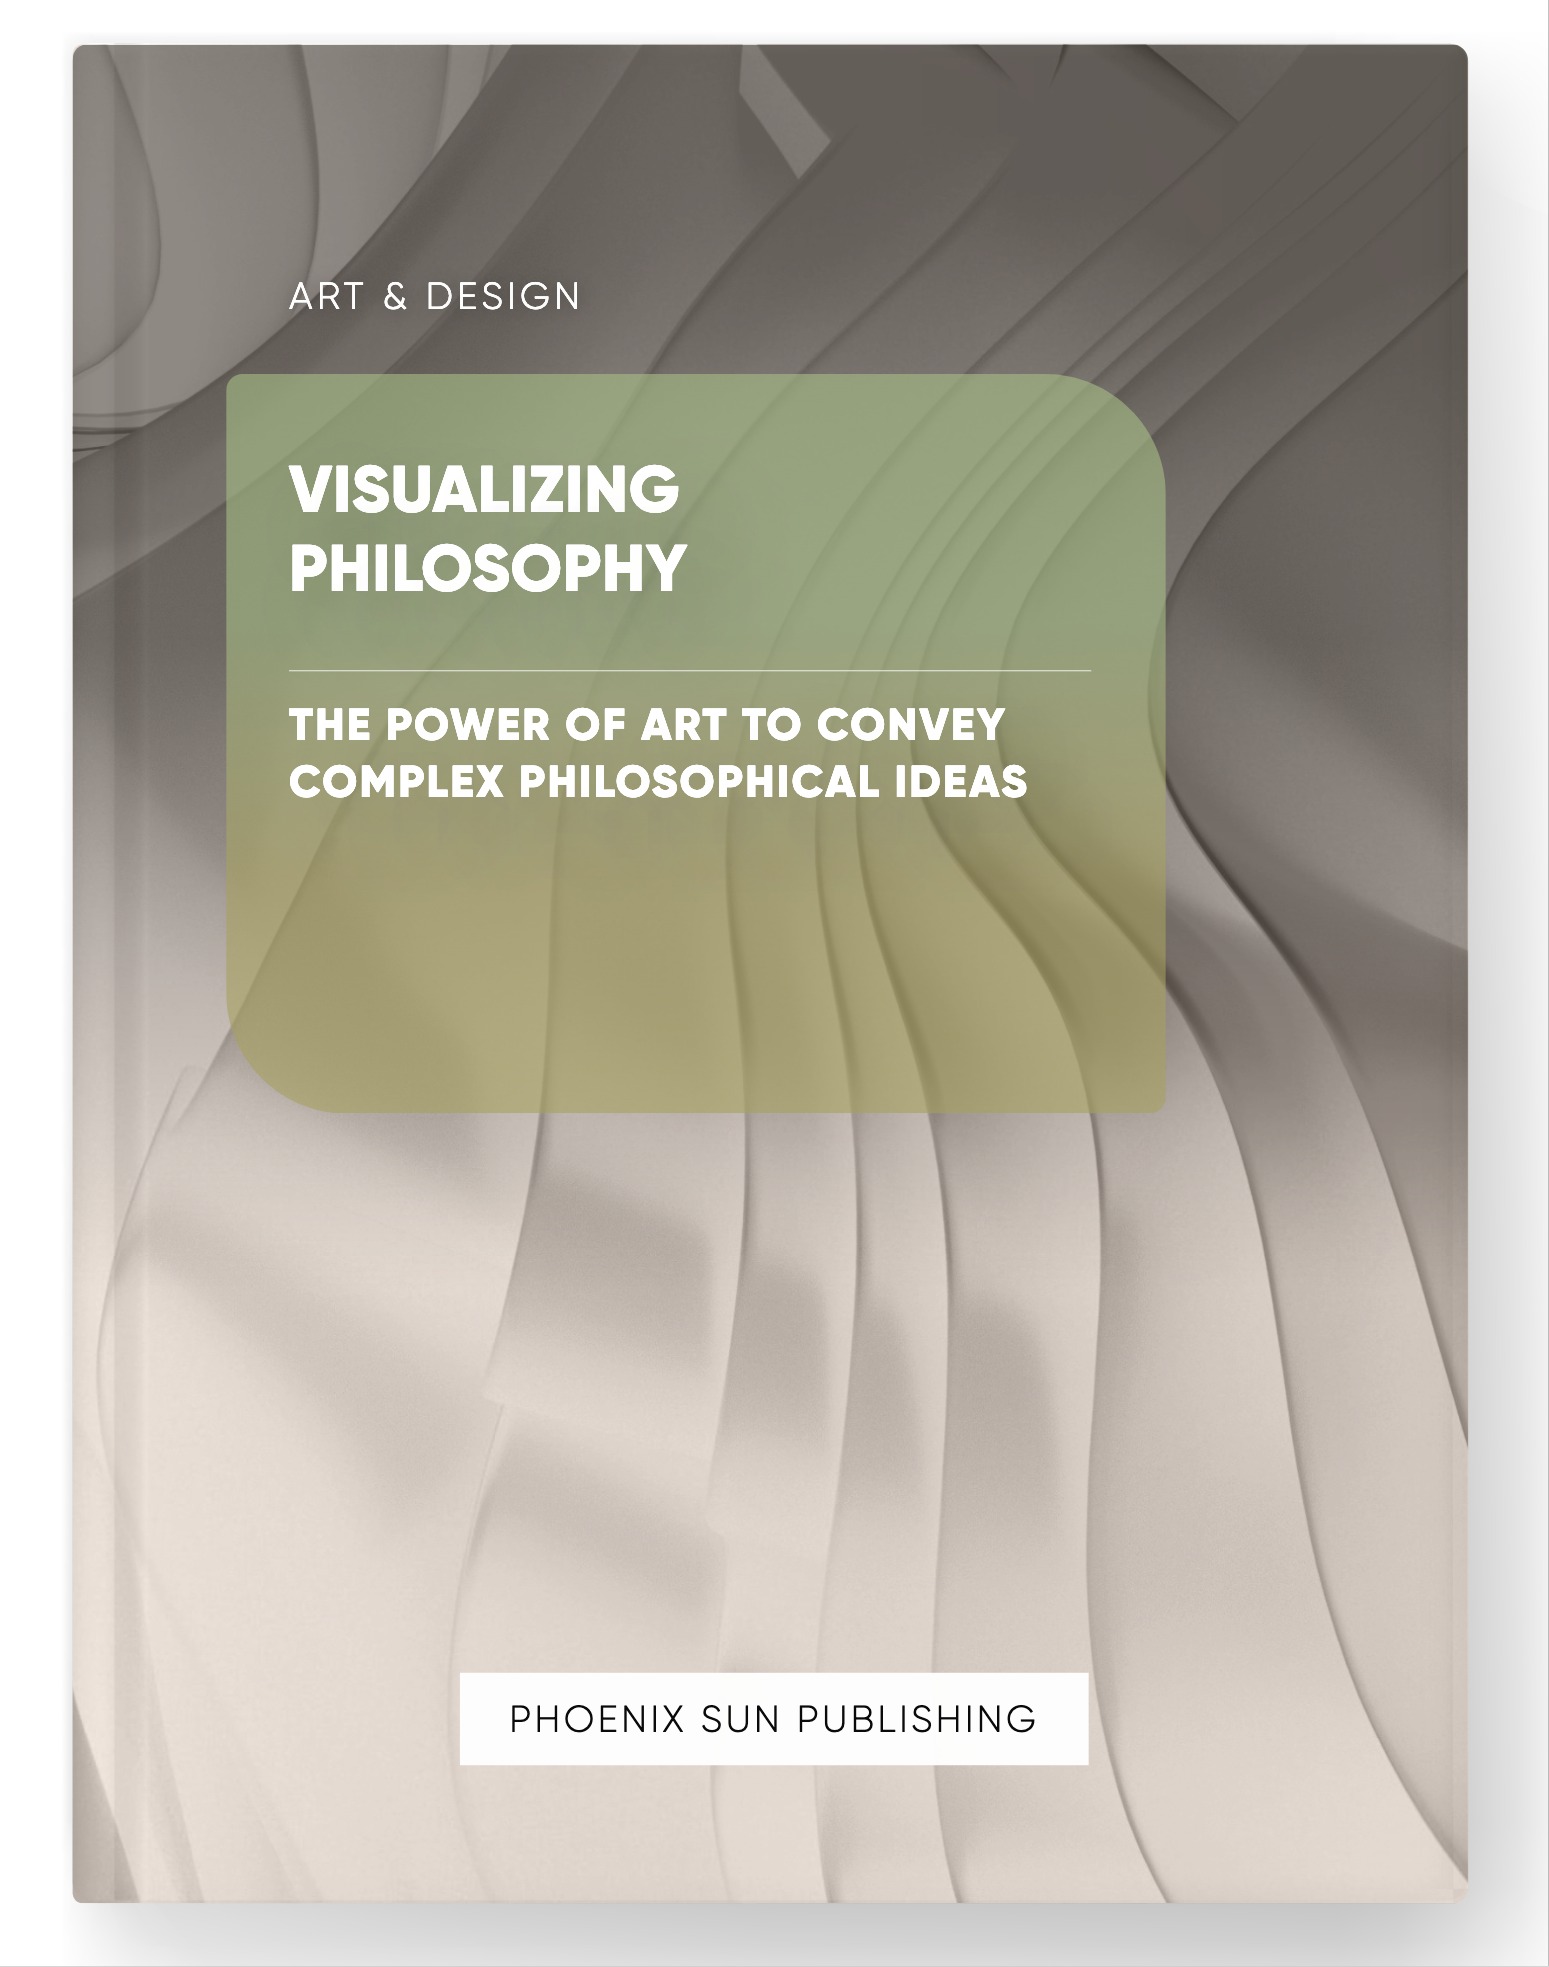 Visualizing Philosophy – The Power of Art to Convey Complex Philosophical Ideas